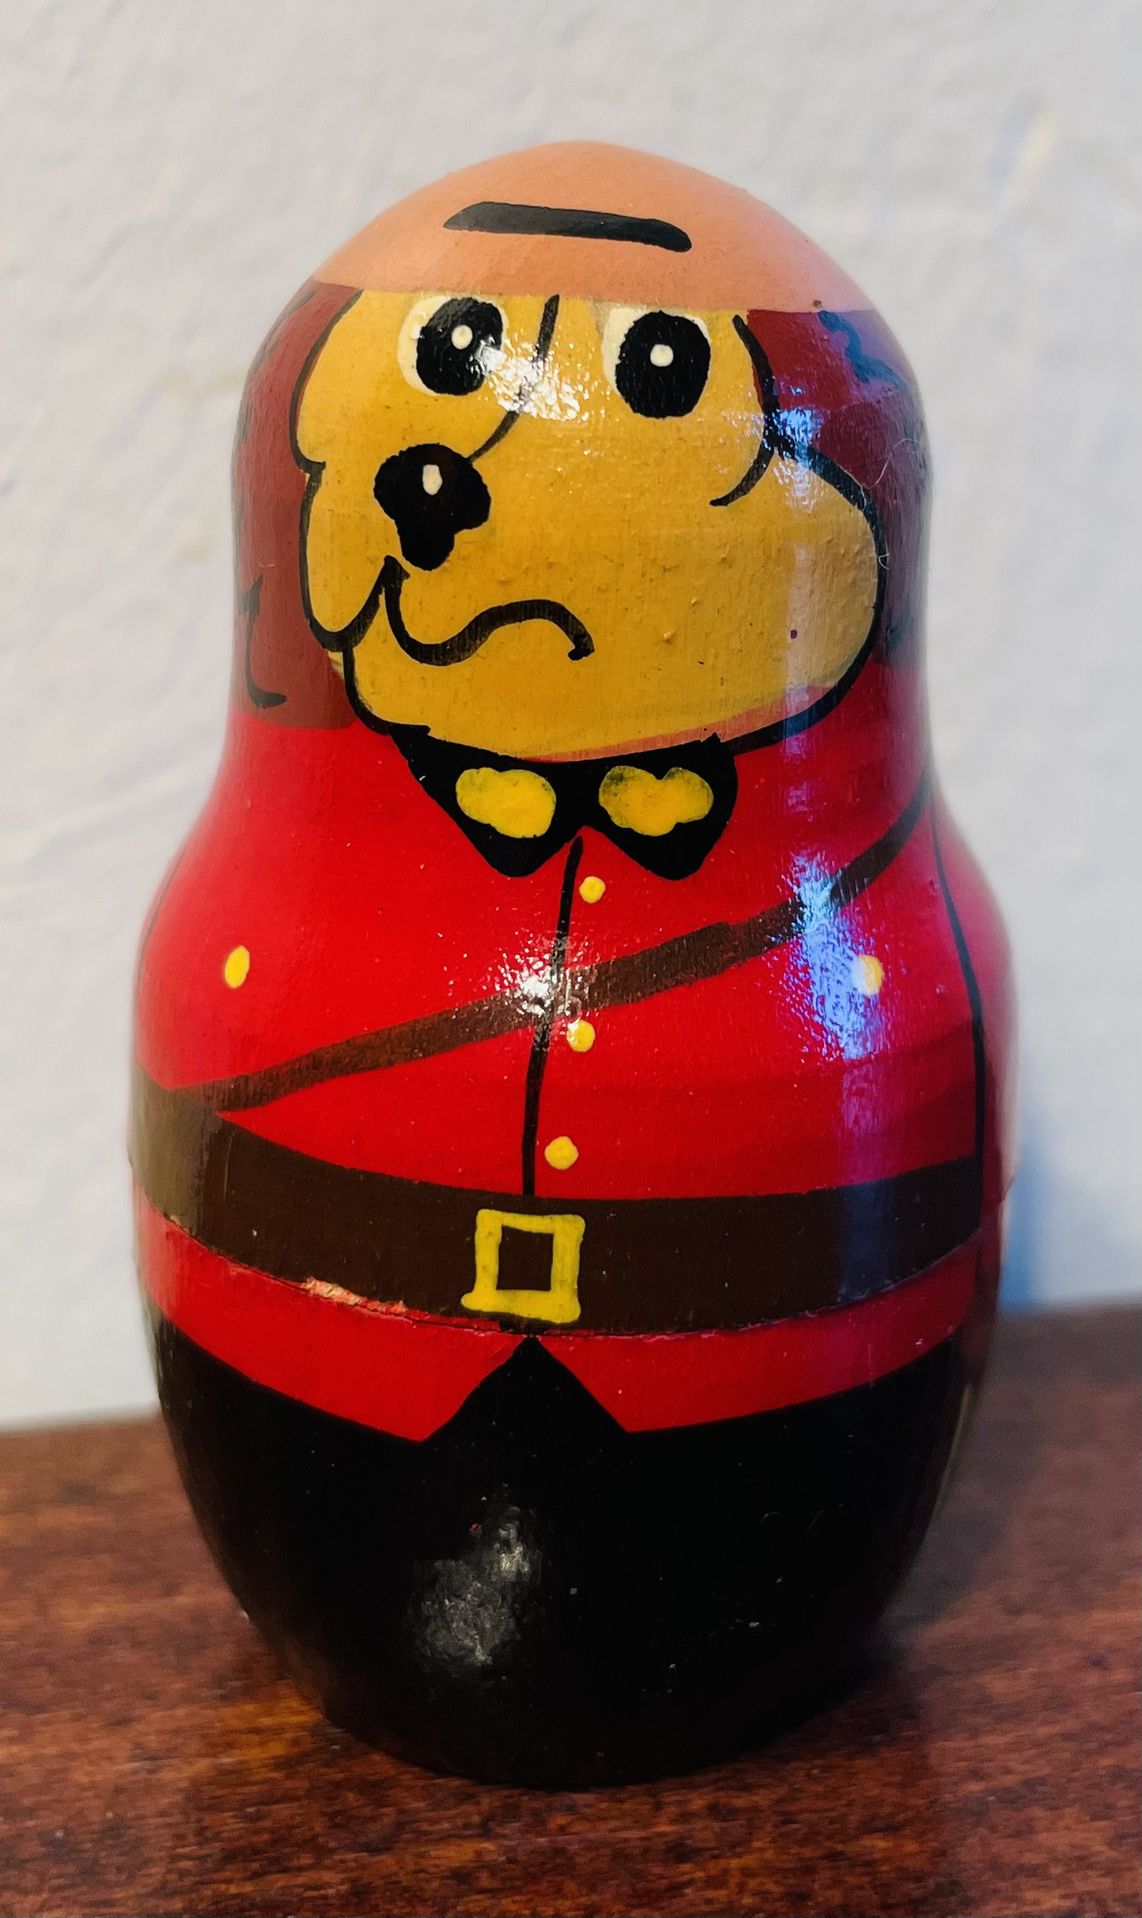 Russian Nesting Dolls Handmade - Purchase Is Tax Deductible 